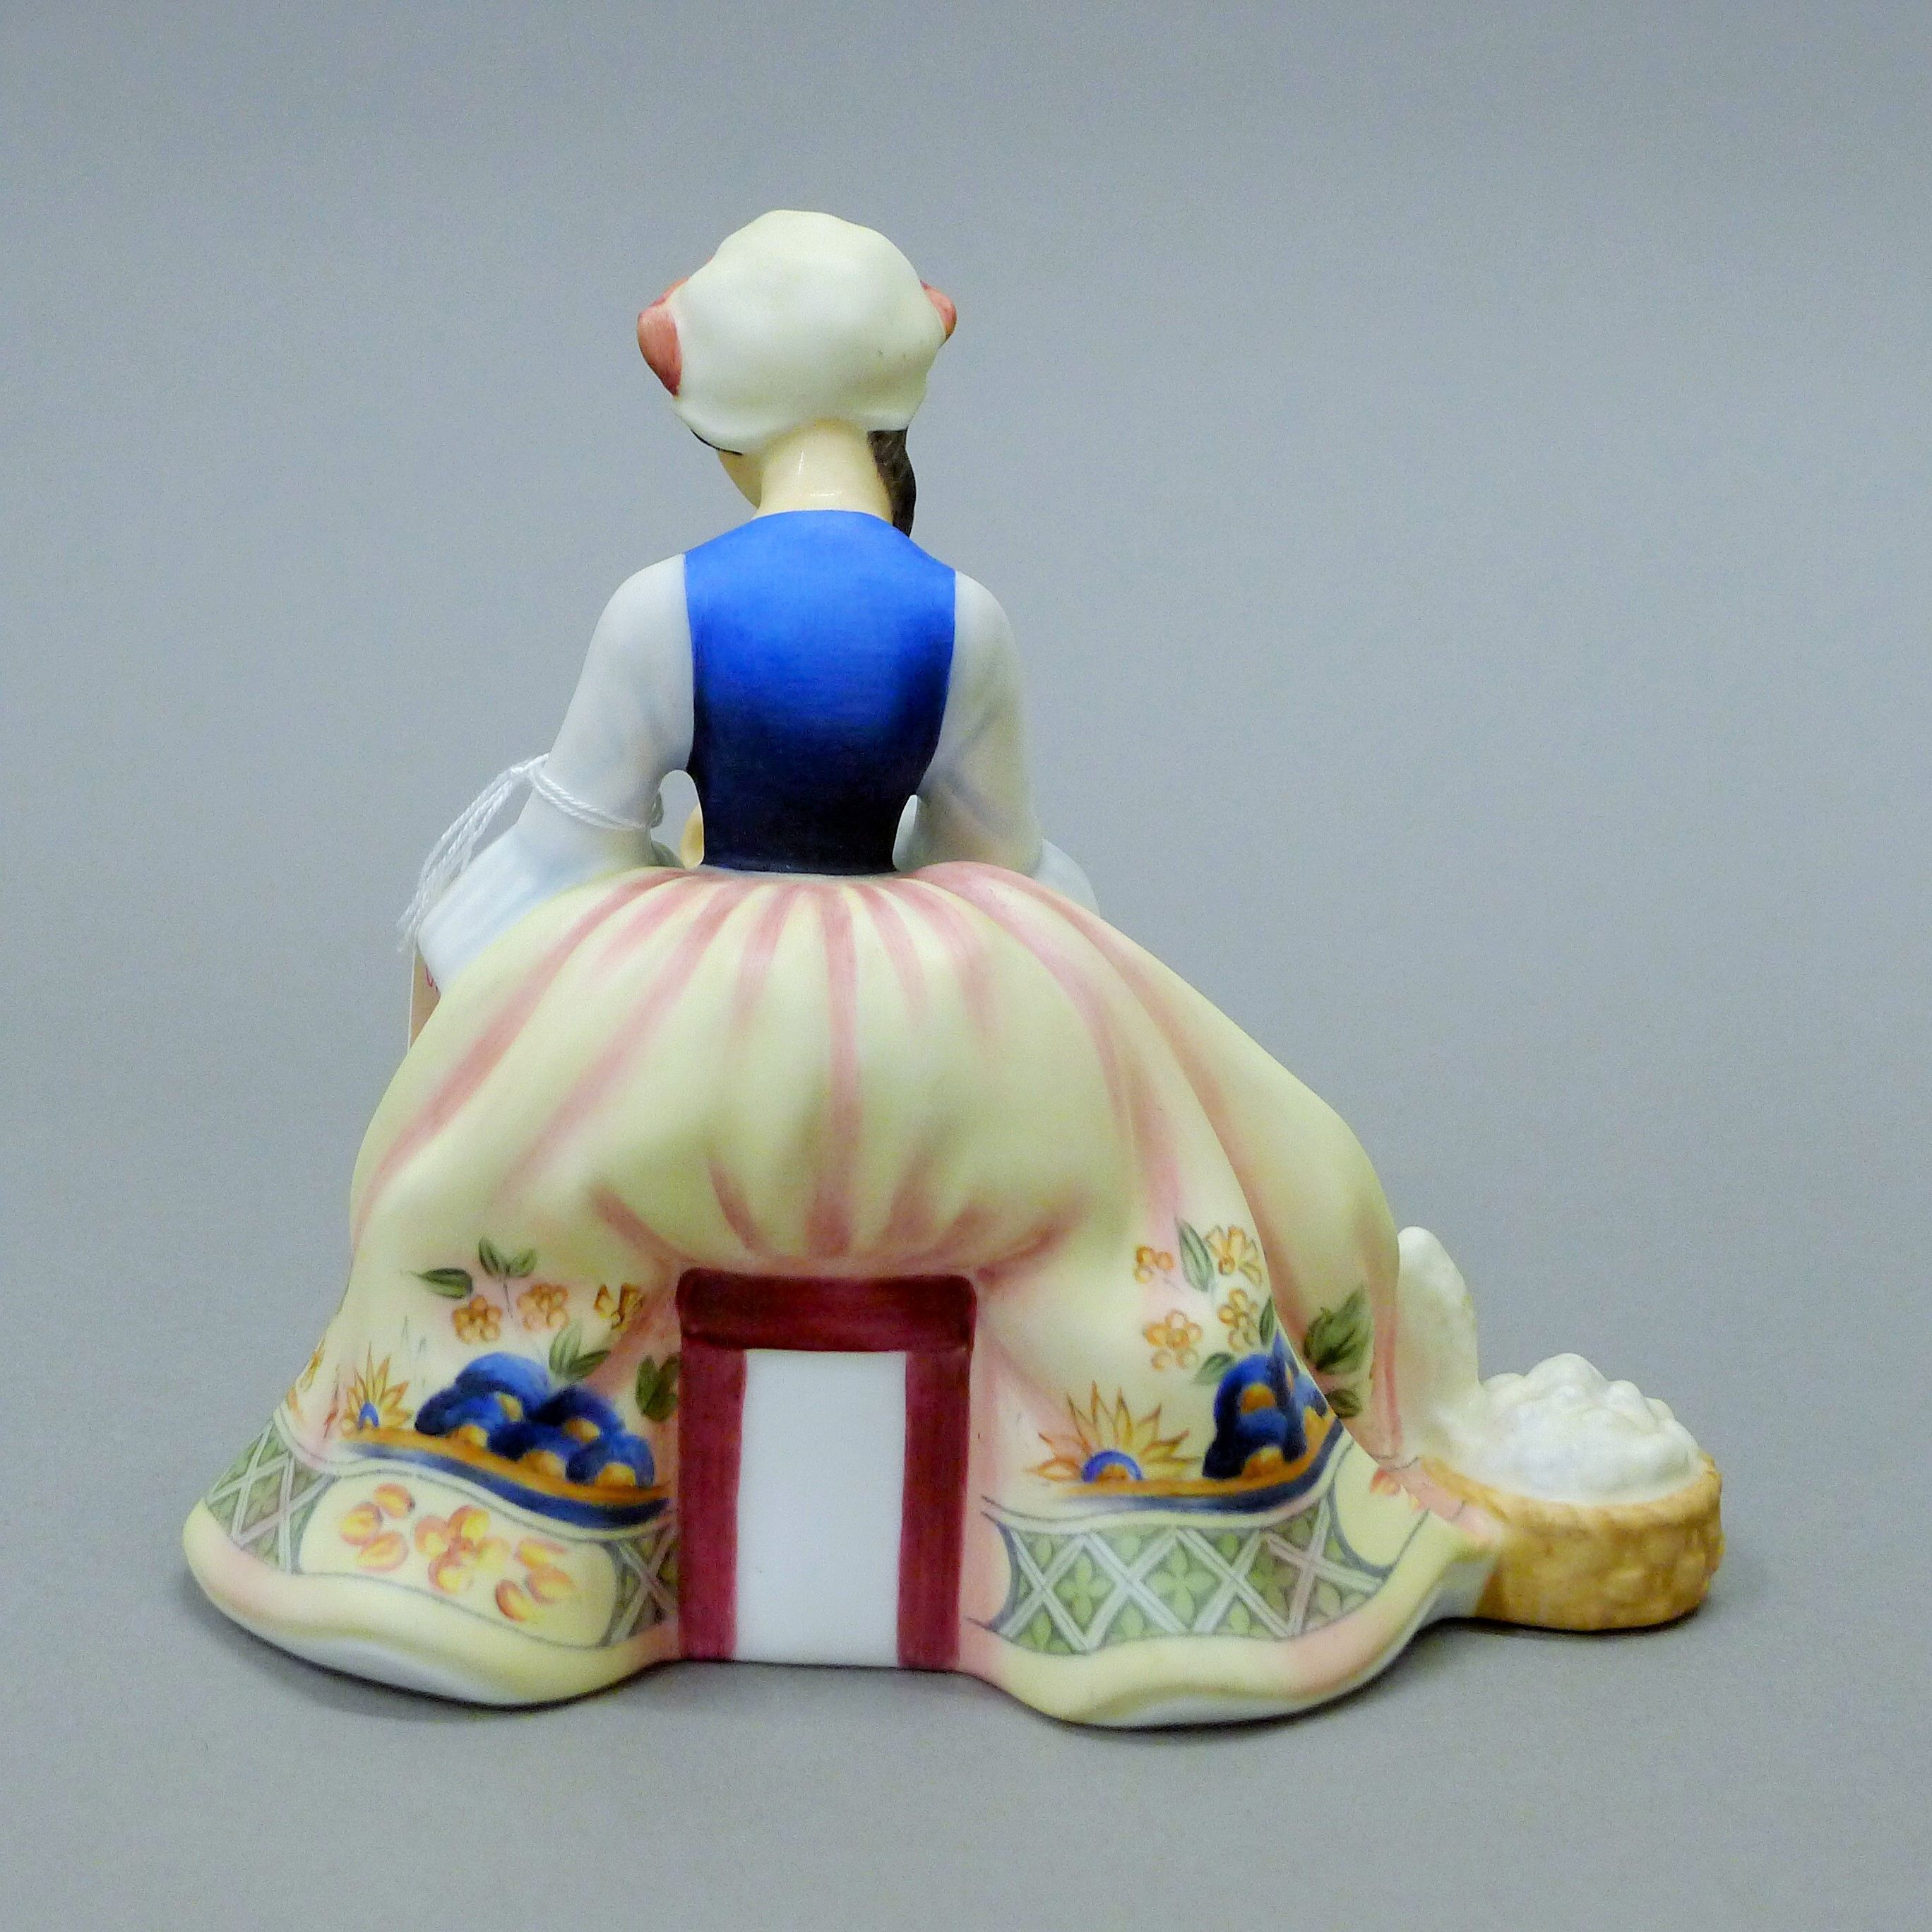 A Royal Doulton figurine, Spinning, HN2390. 17 cm high. - Image 3 of 5